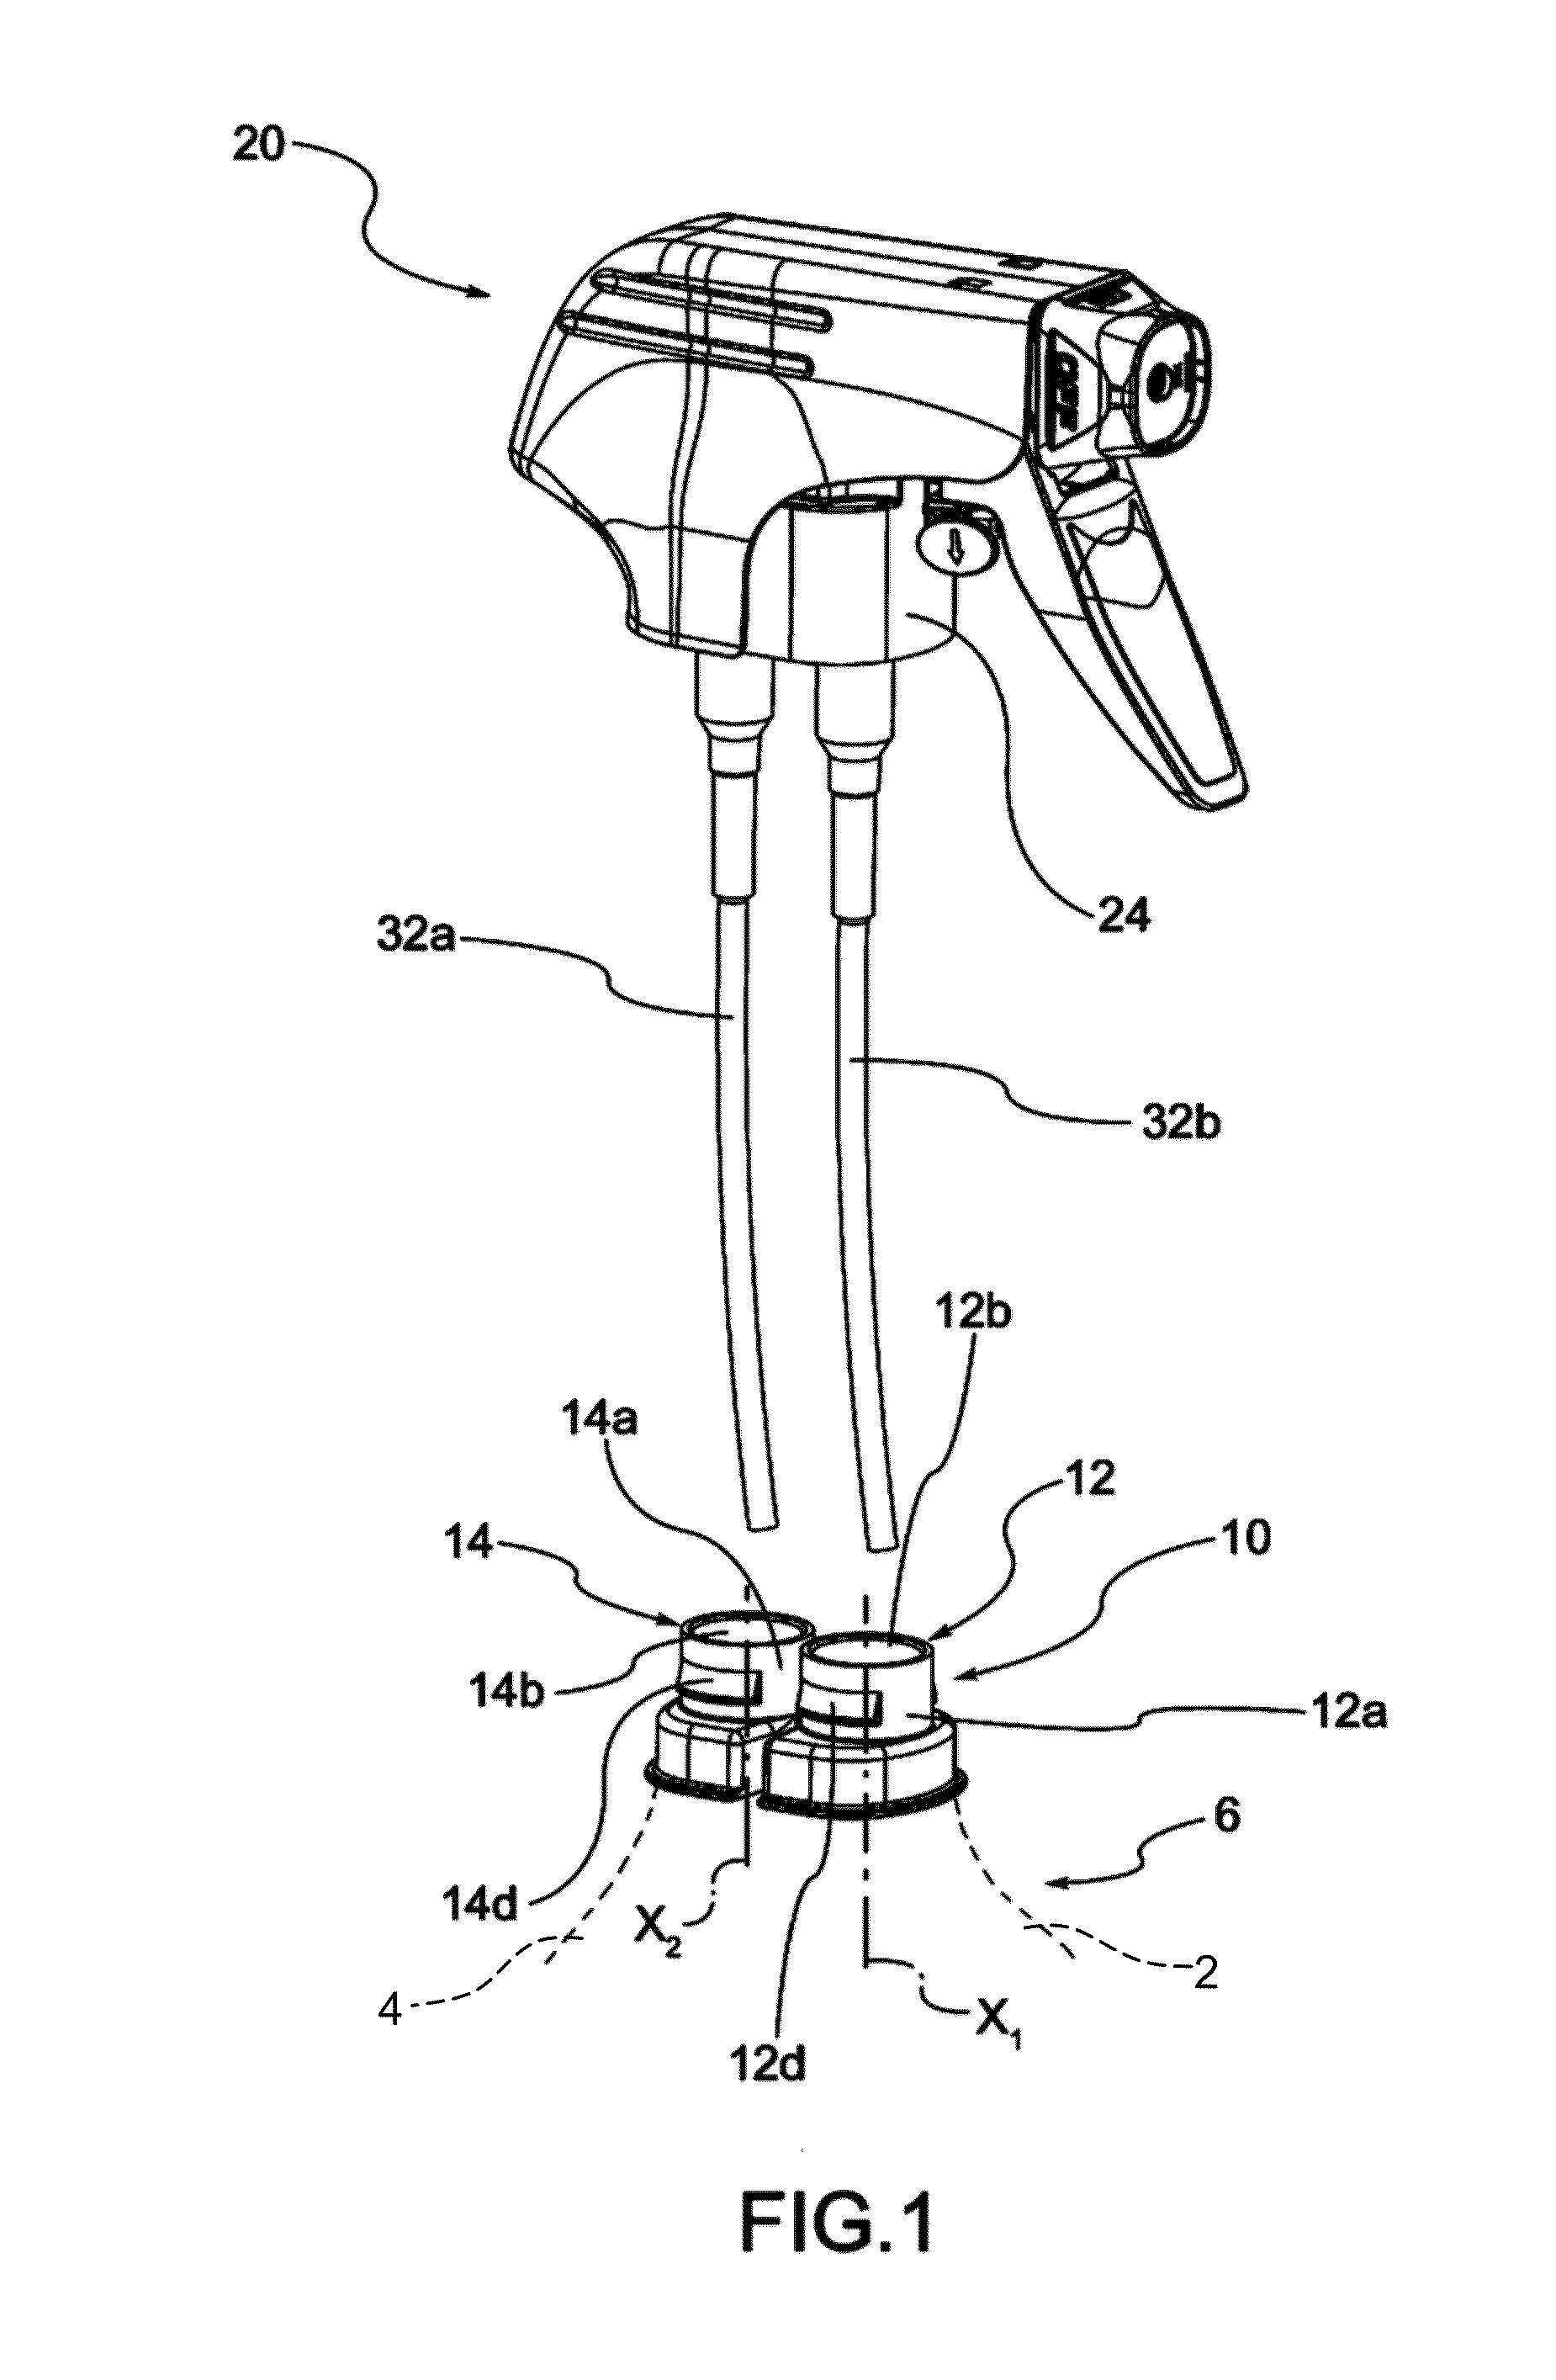 Dual chamber spray dispenser with a single delivery tube